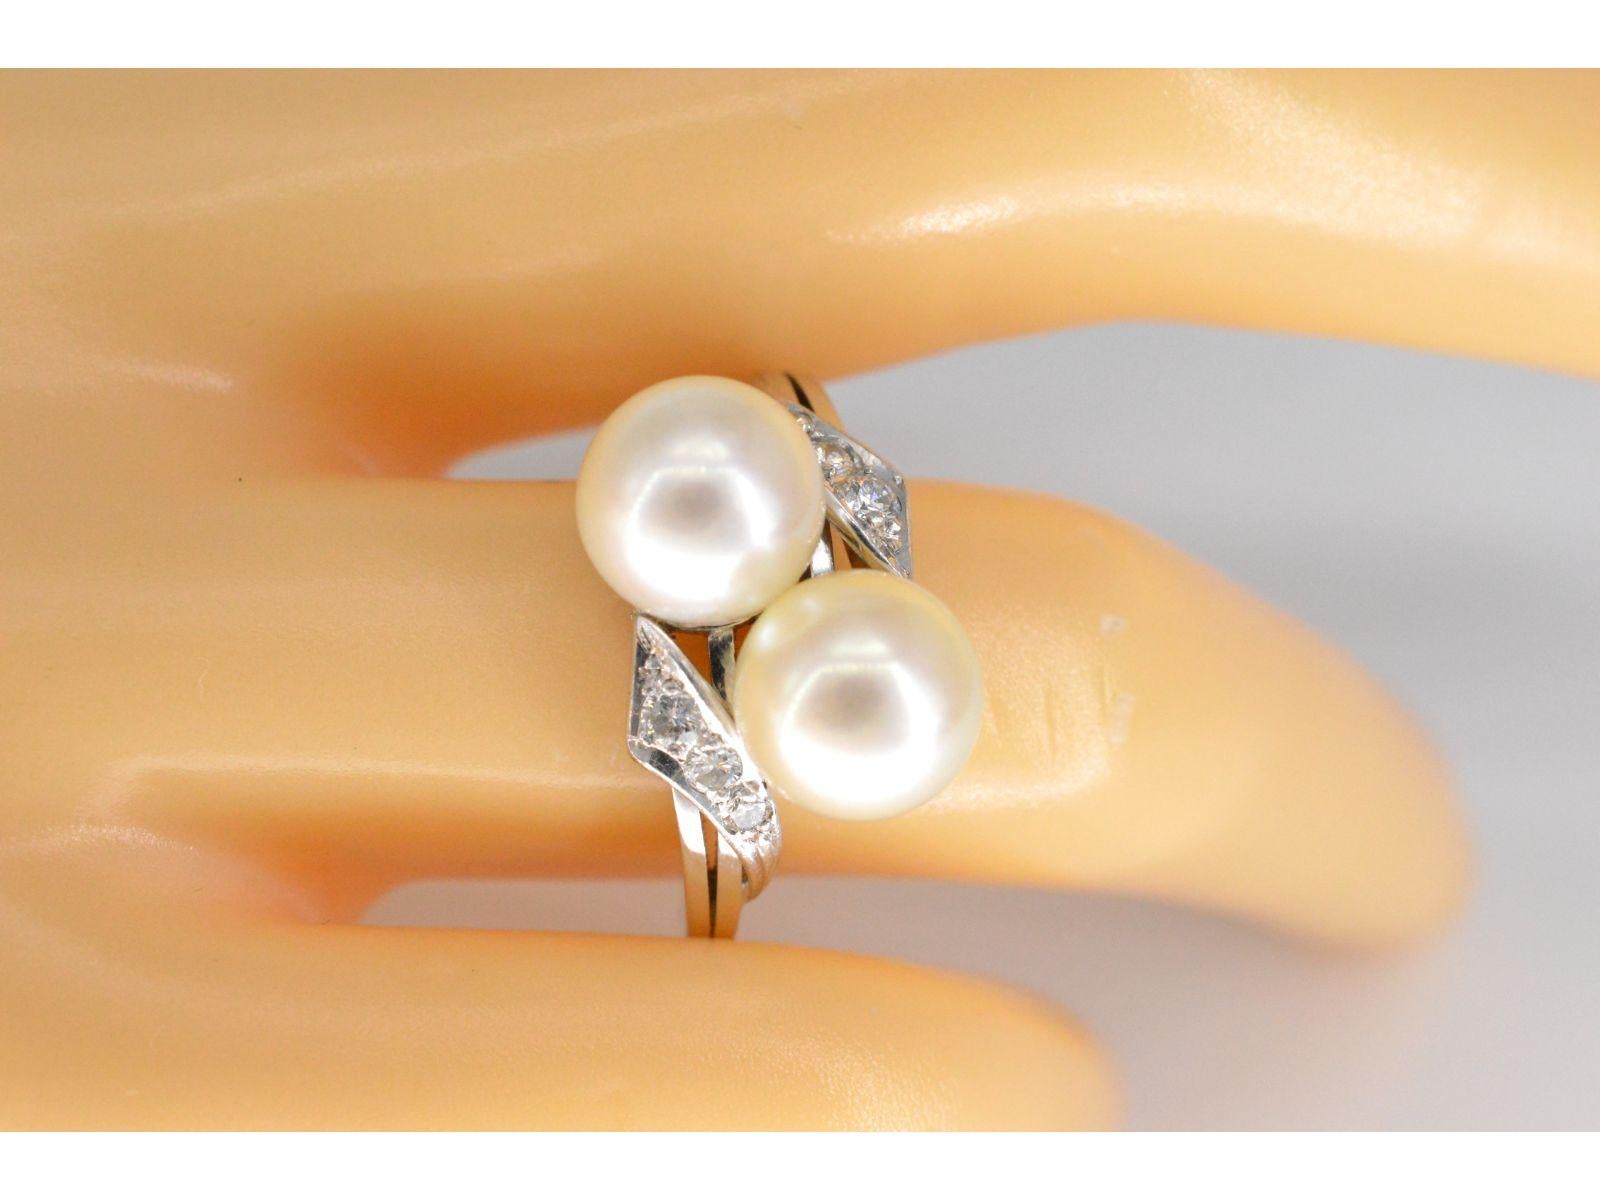 This vintage ring features two stunning pearls with a white-pink-cream color, each measuring 8 mm. The brilliance is enhanced by six brilliant-cut diamonds, totaling 0.18 carats, showcasing F-G color and VS clarity. Weighing 5.5 grams, the ring is